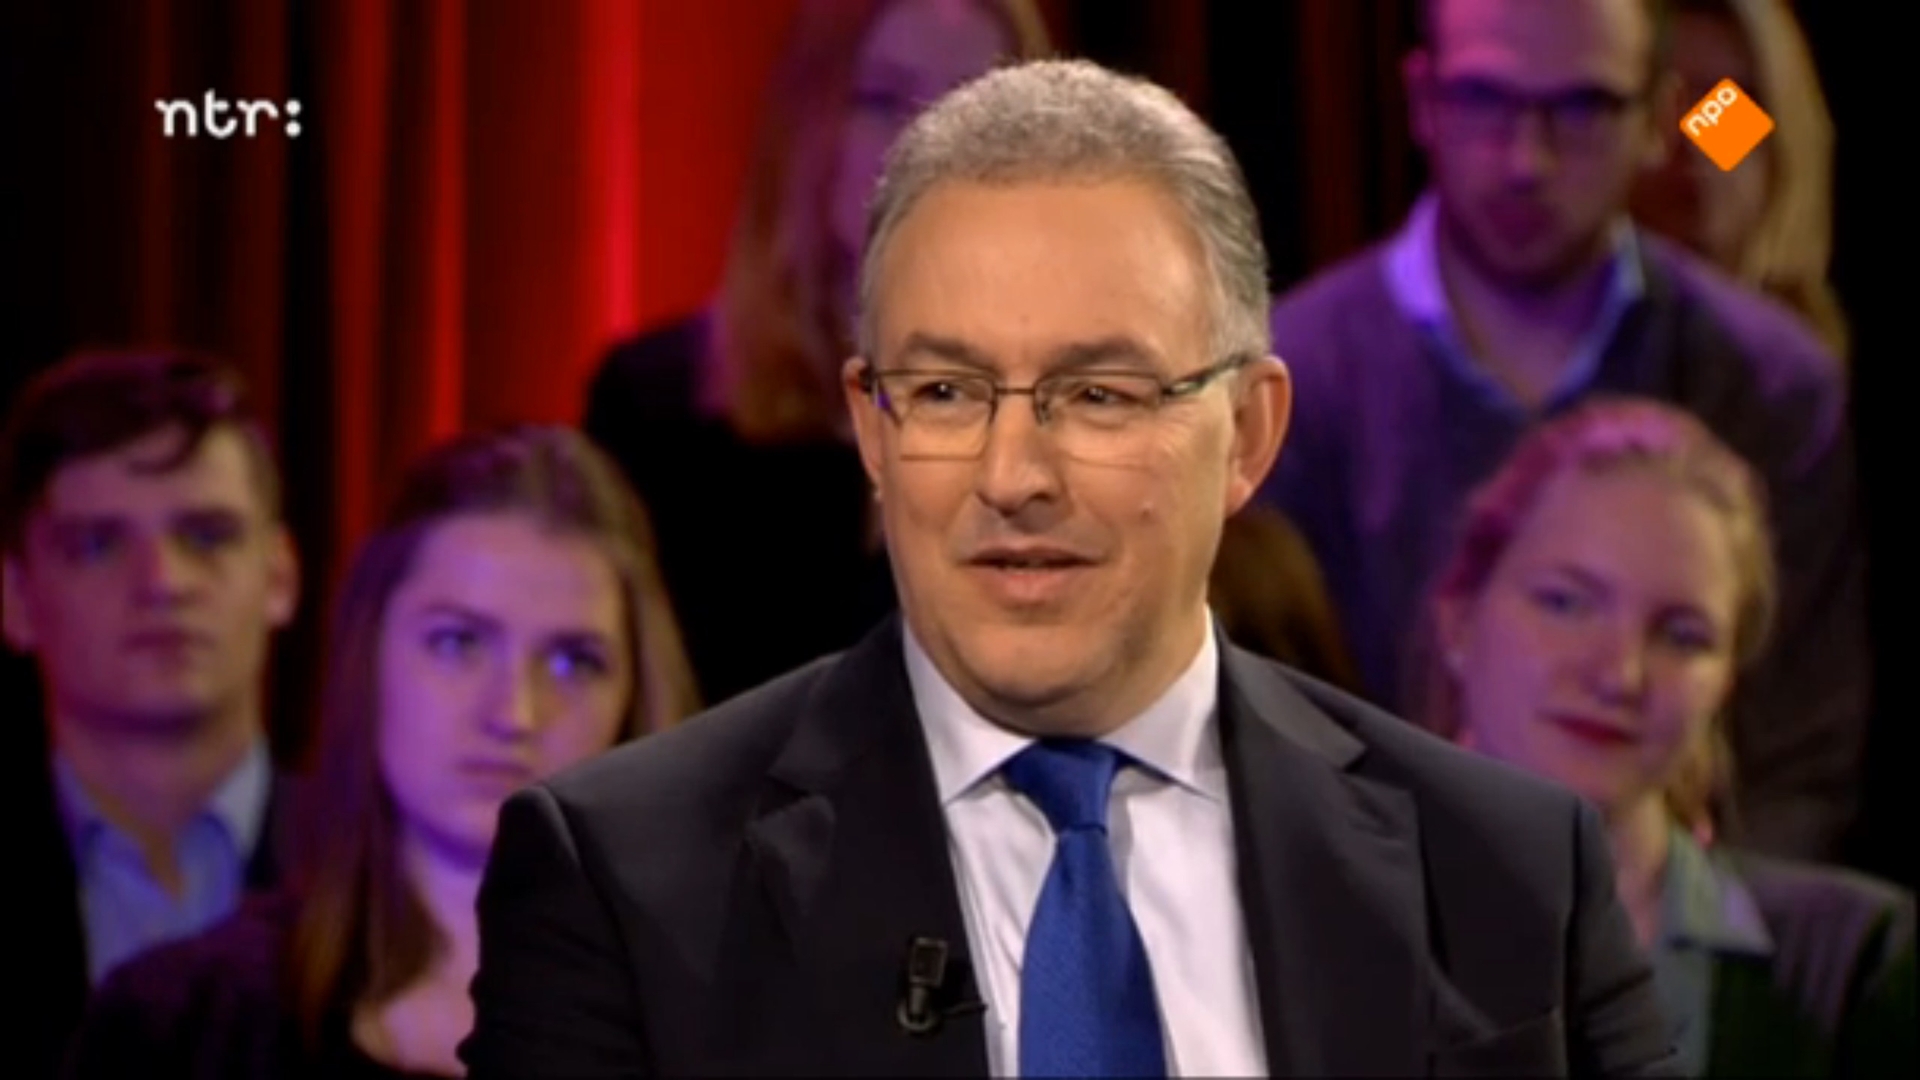 aboutaleb